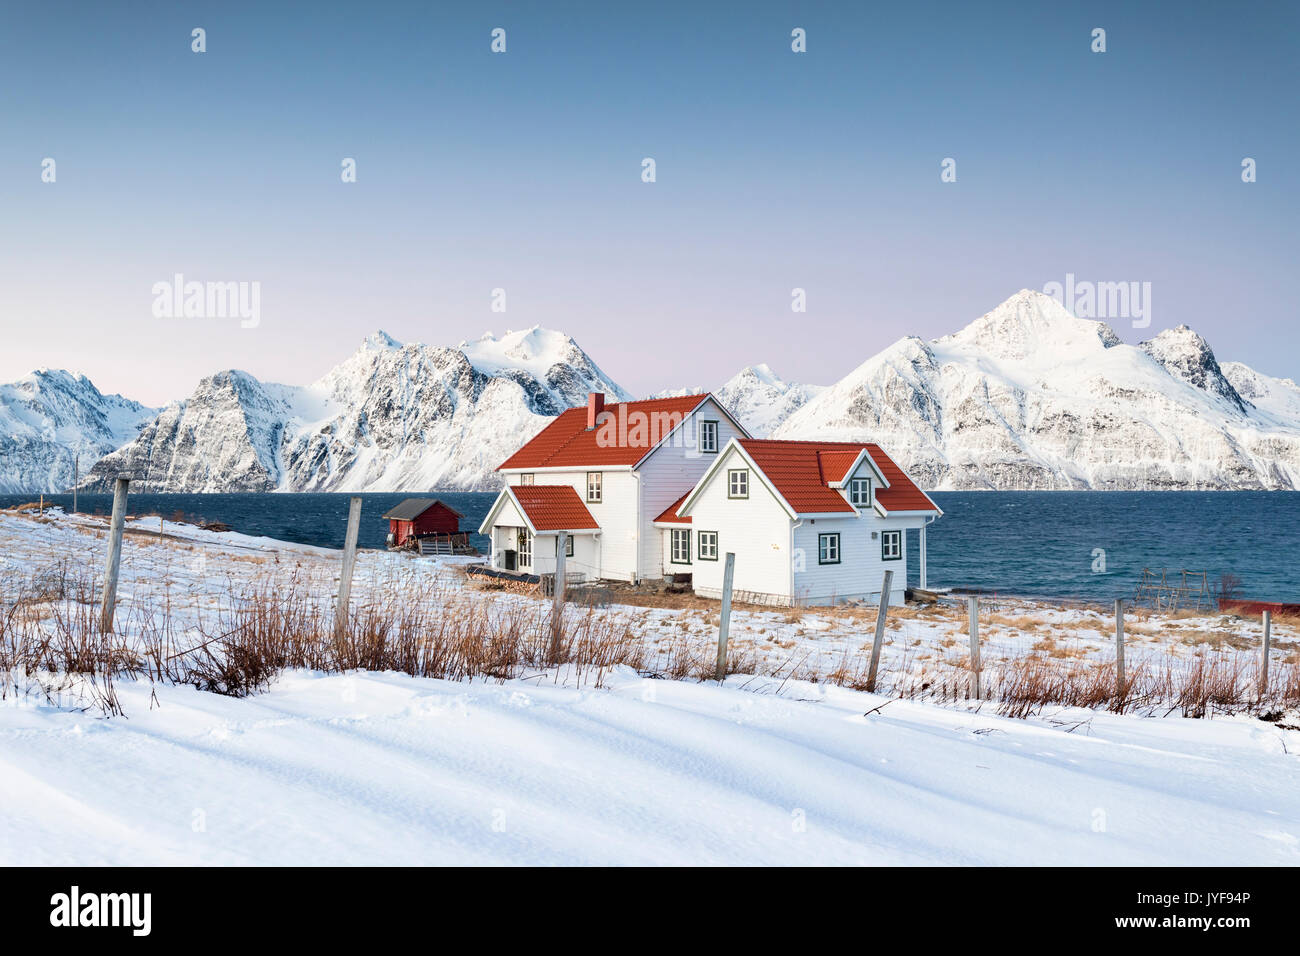 Blue sky on the wooden huts called Rorbu framed by frozen sea and snowy peaks Djupvik Lyngen Alps Tromso Norway Europe Stock Photo